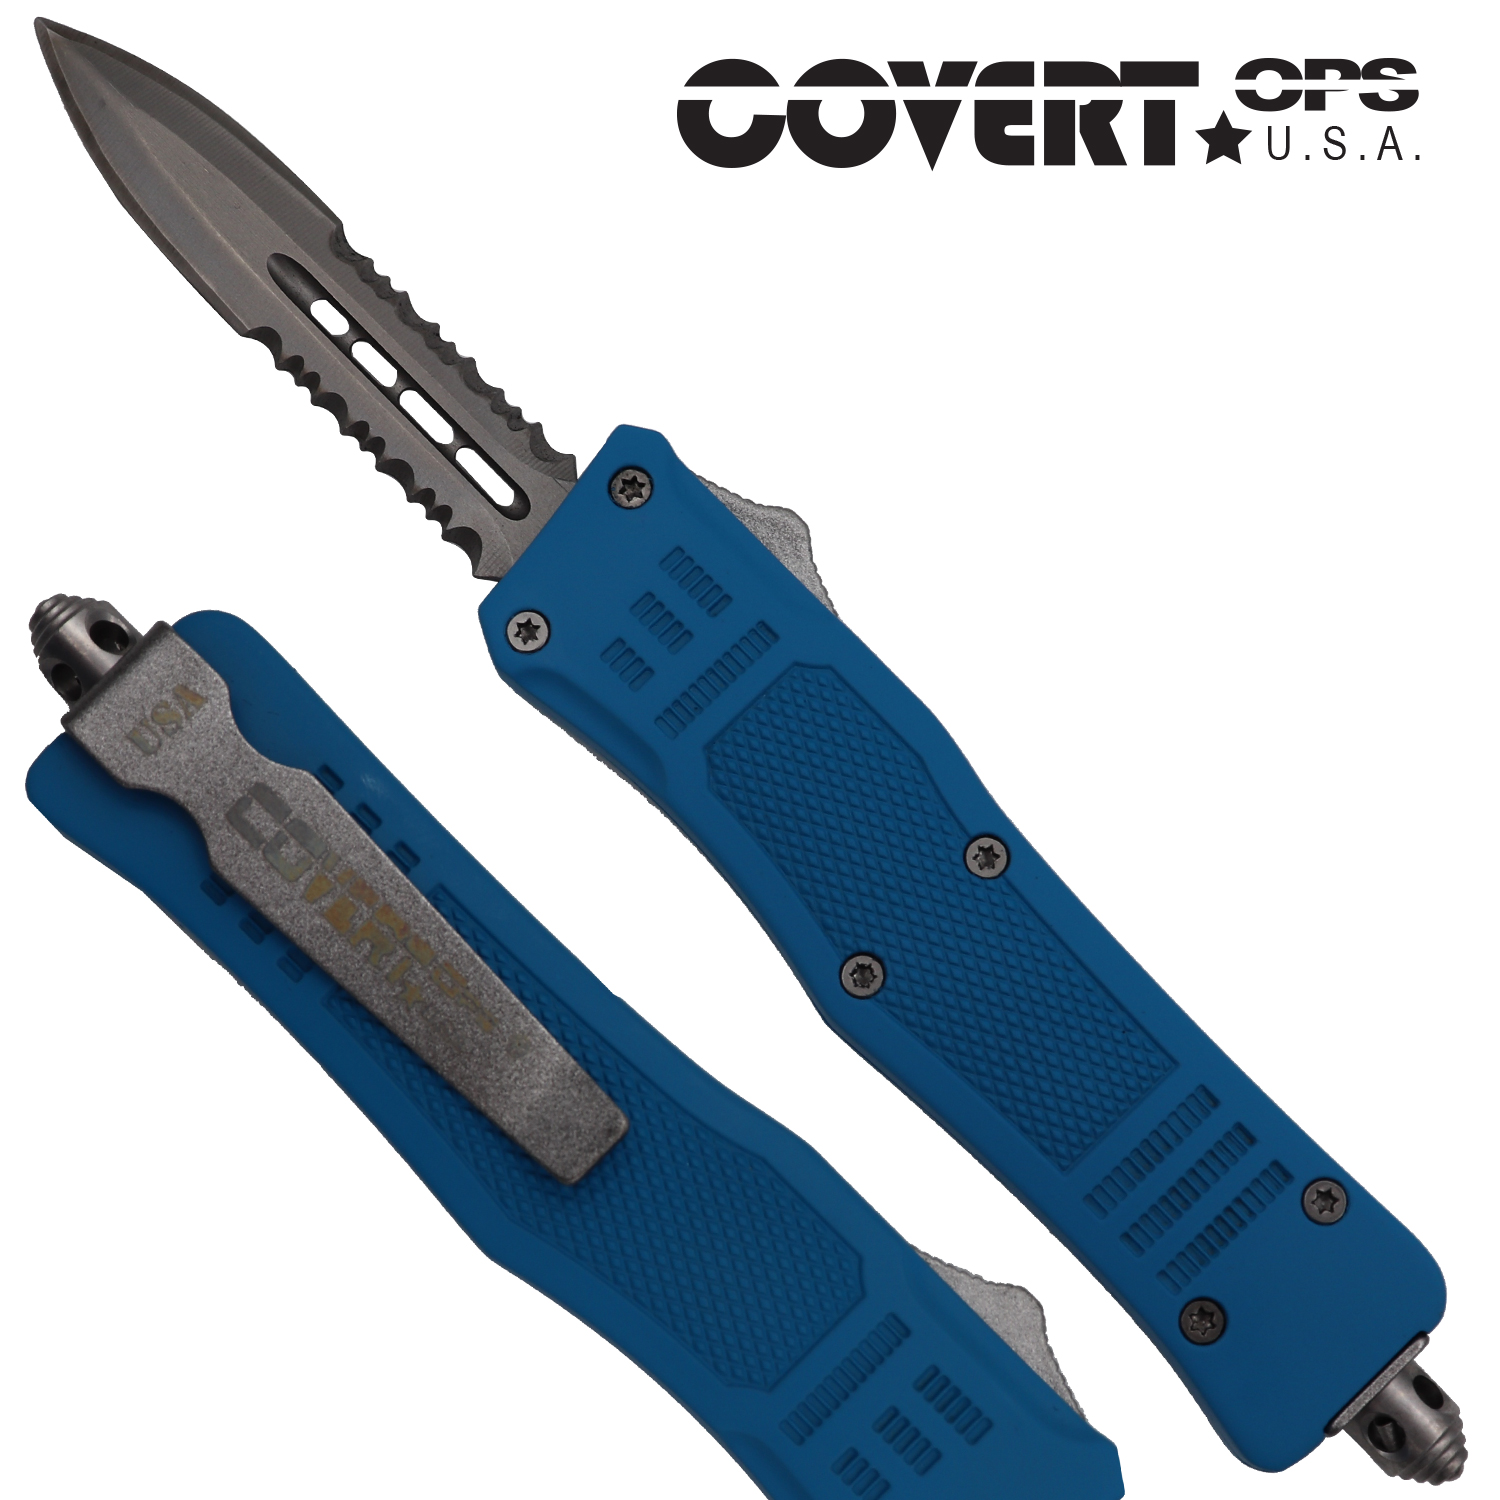 Covert OPS USA OTF Automatic Knife 7 inch overall Blue Handle Silver Double Edge D2 Steel Blade